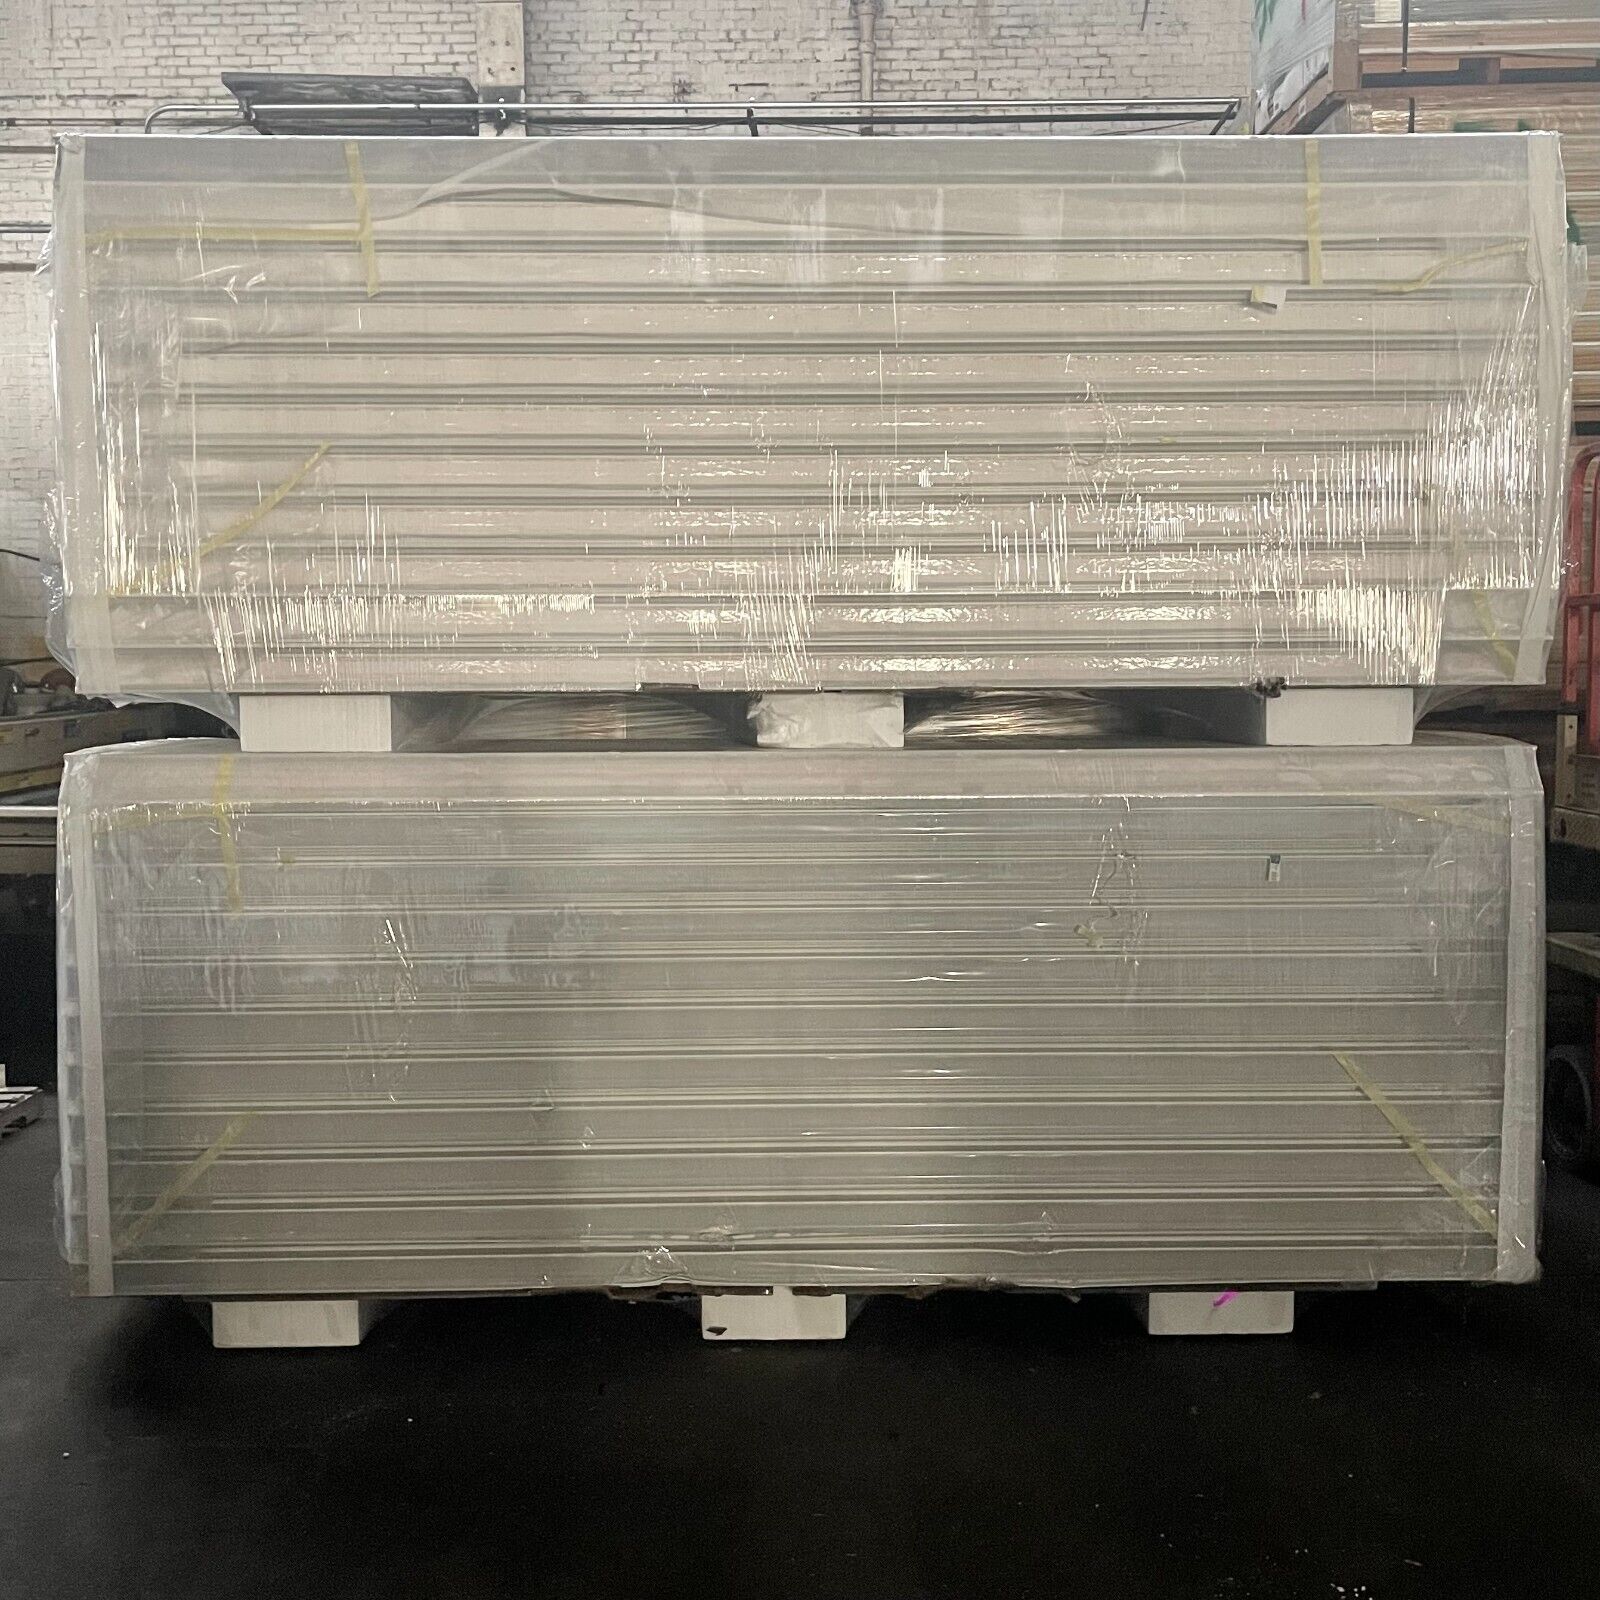 8 foot 4 inch thick Walk-in Cooler & Freezer Panels Ready to ship